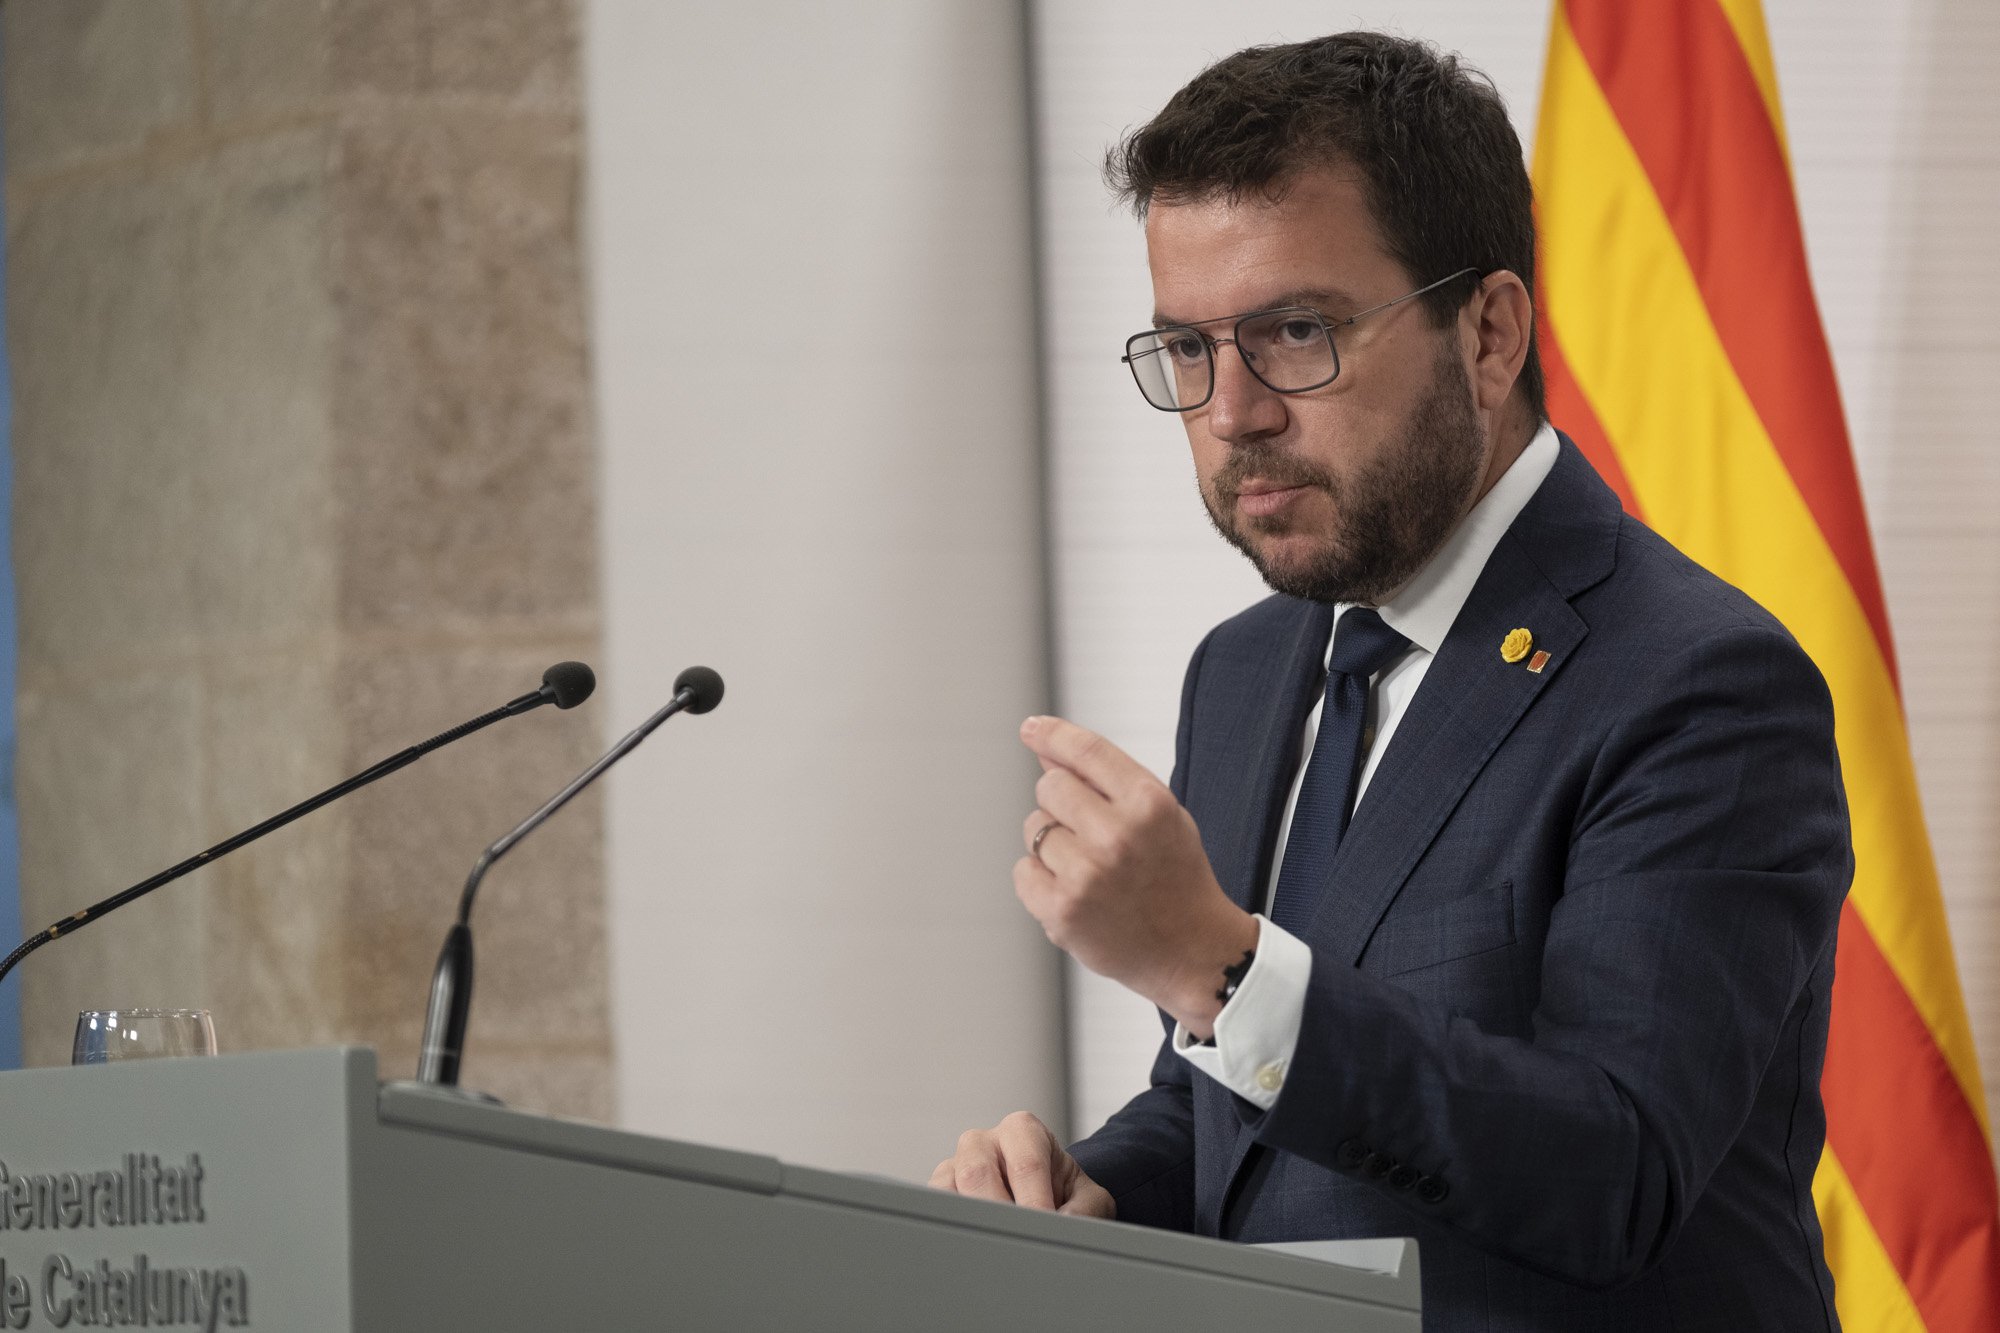 Aragonès on new tax figures: "We need a Catalan state to end the historical plunder"